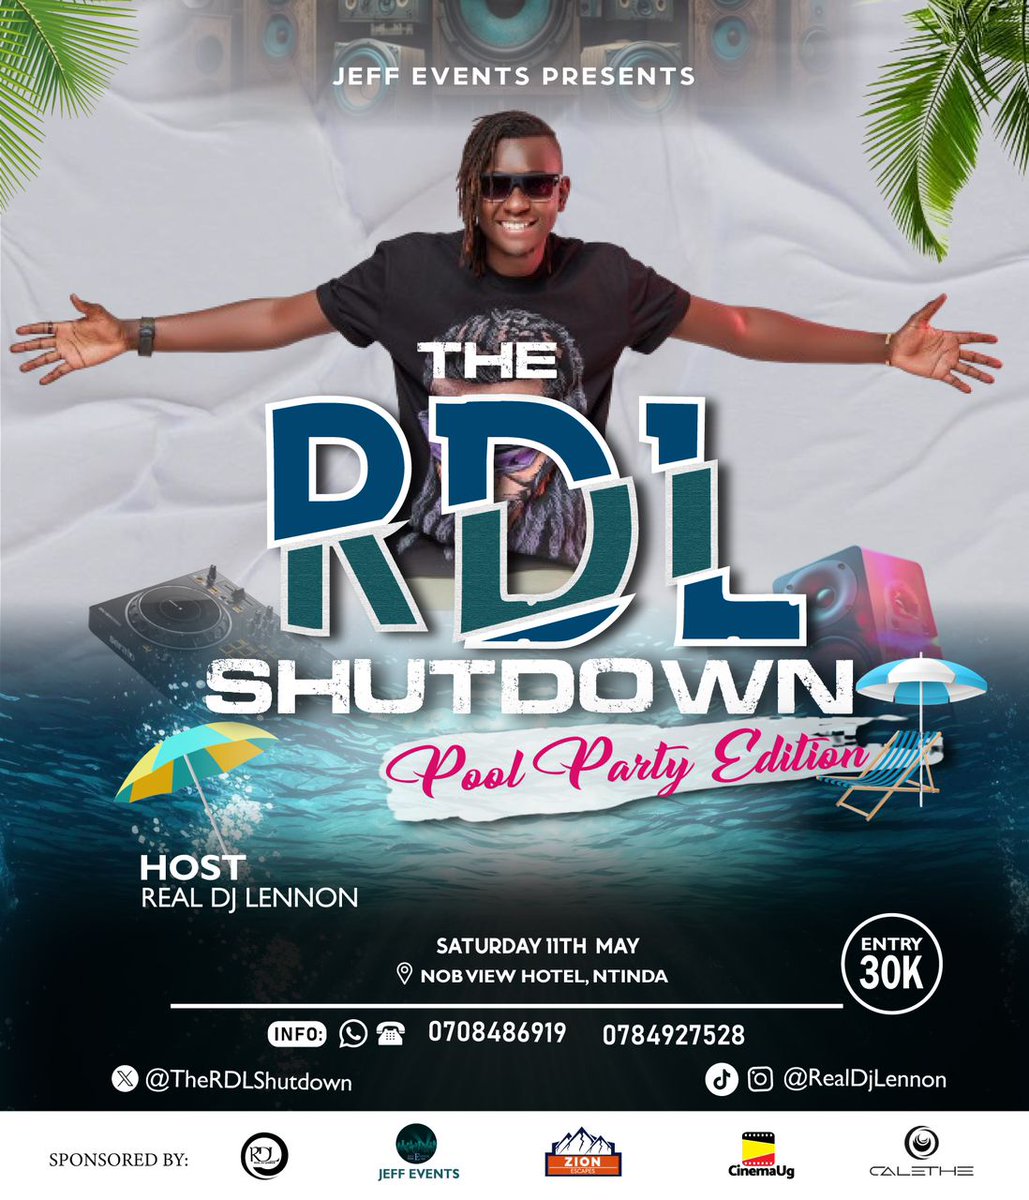 Come 11th May, we are all heading to Nob View Hotel-Ntinda, to support a bro, sikyo uncle @Ssensalo_B ! #TheRDLShutdown